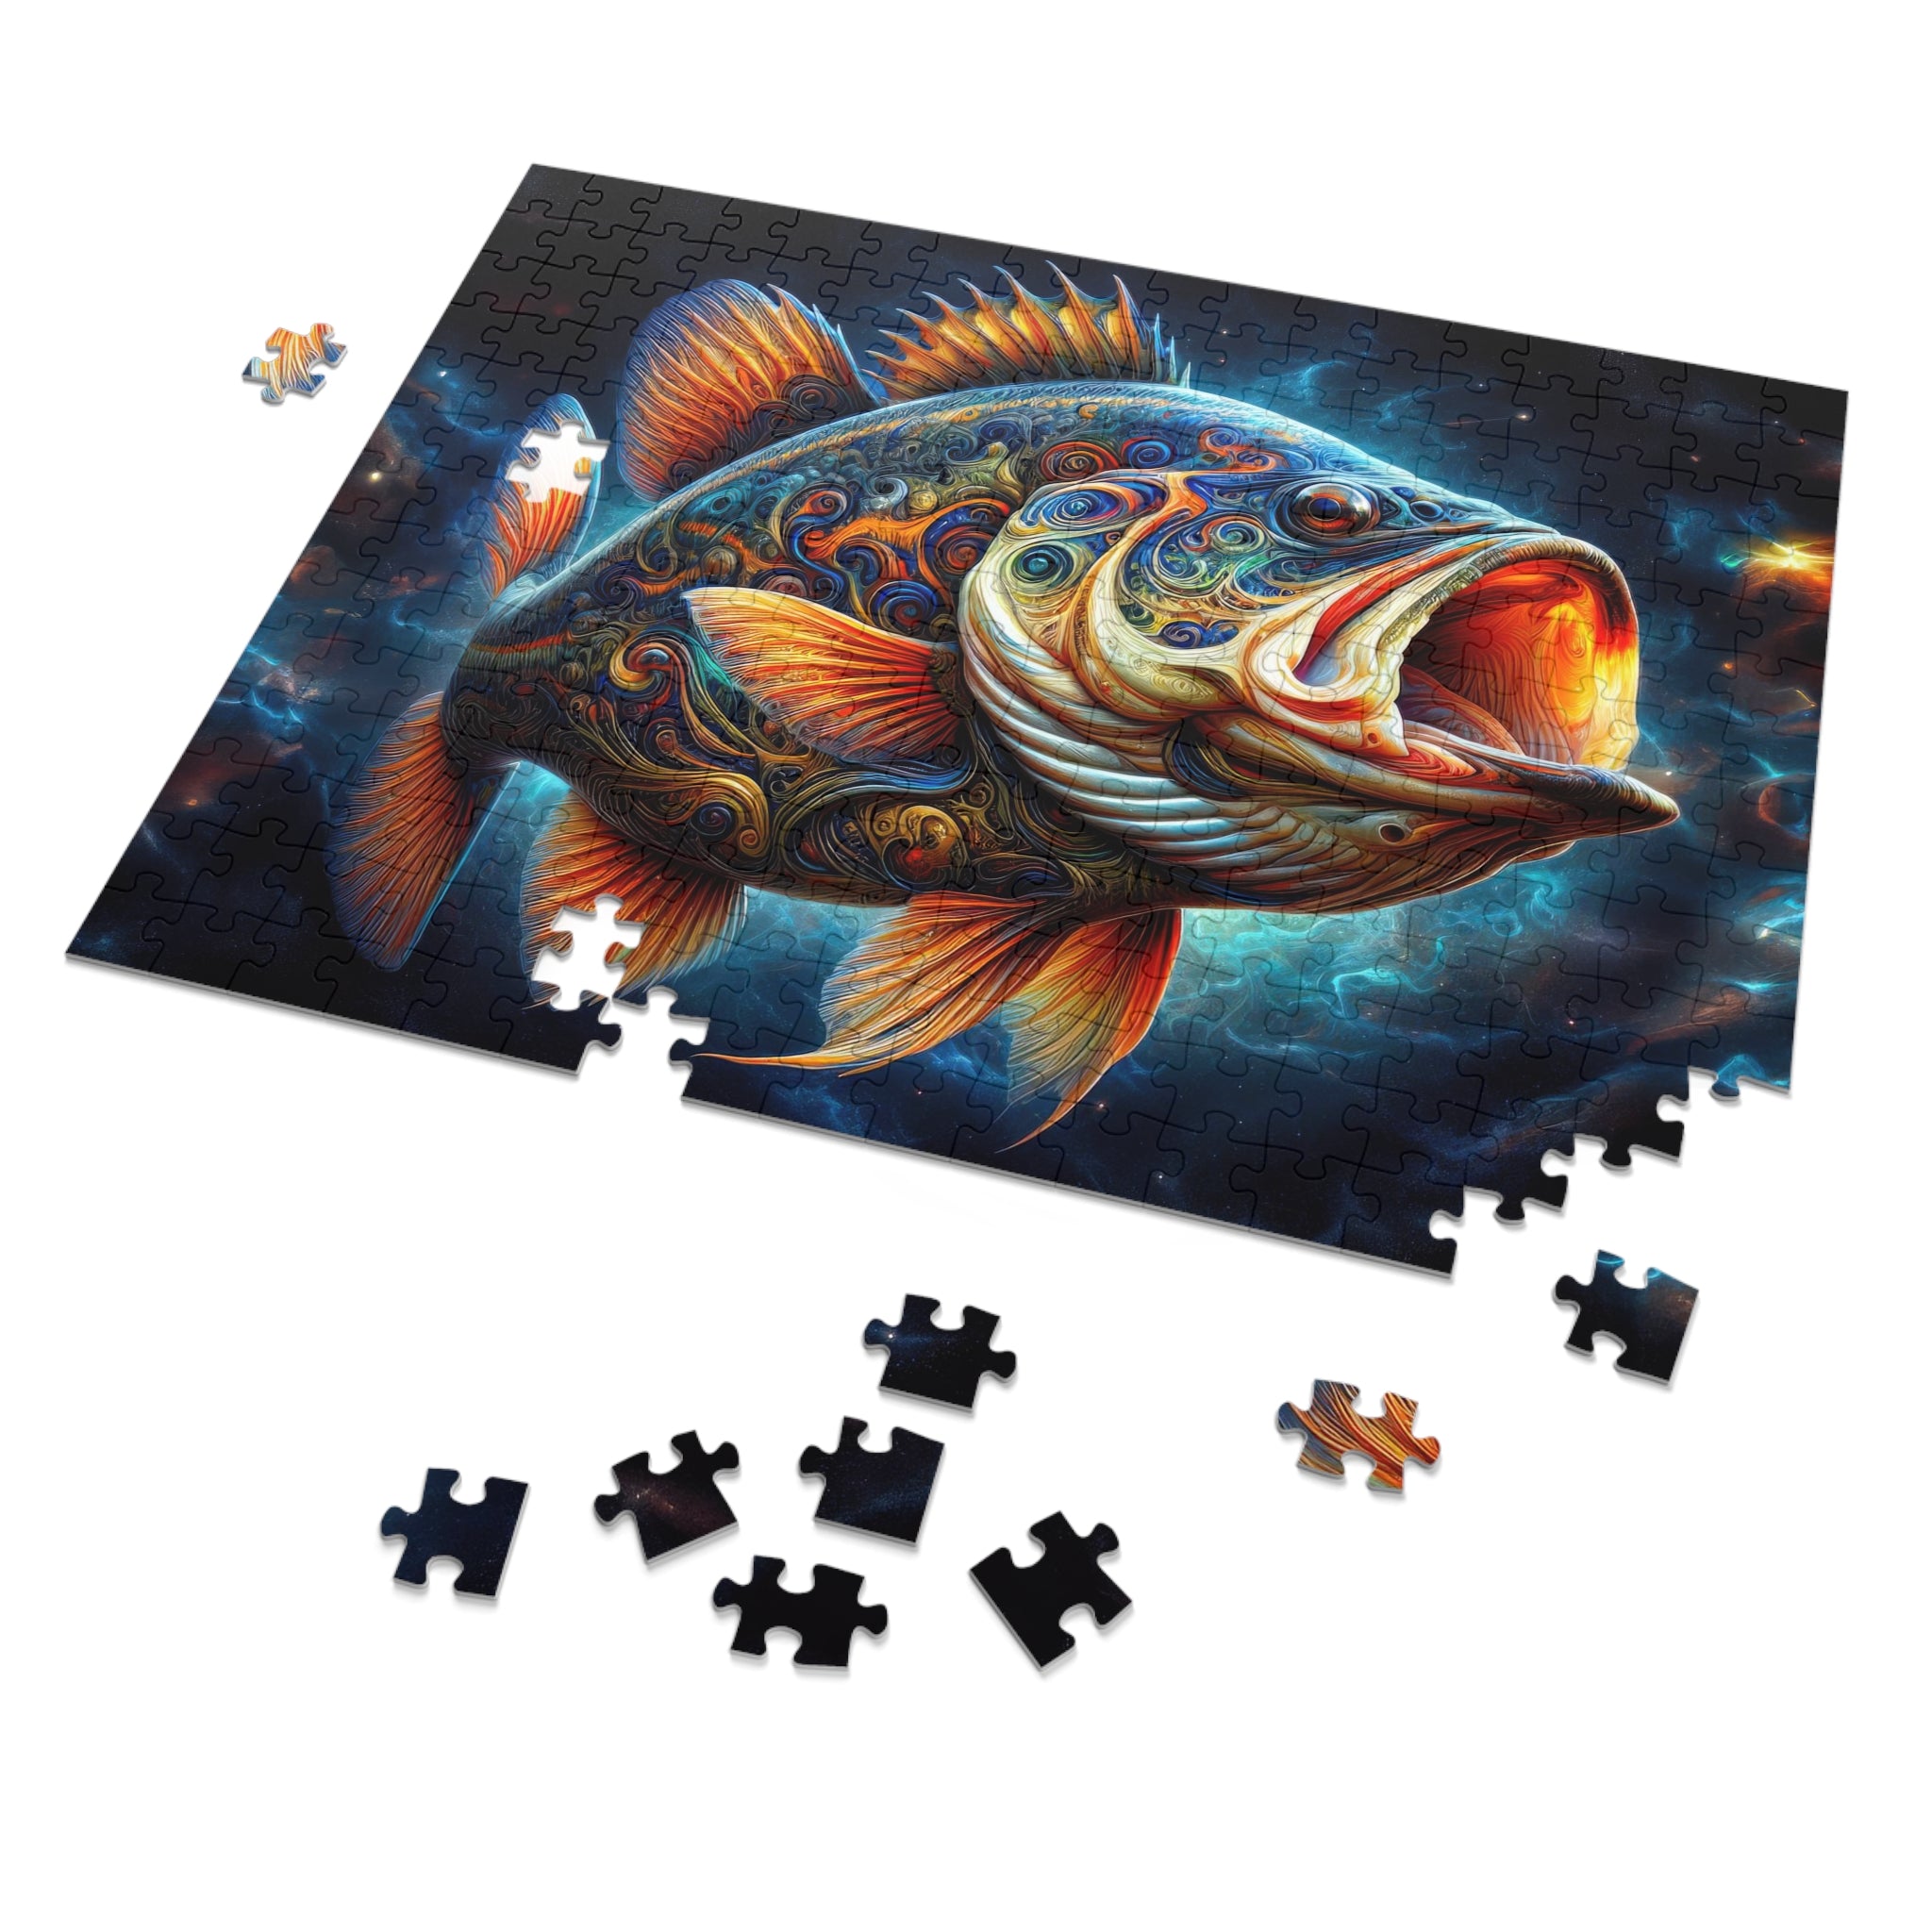 Celestial Voyager Jigsaw Puzzle